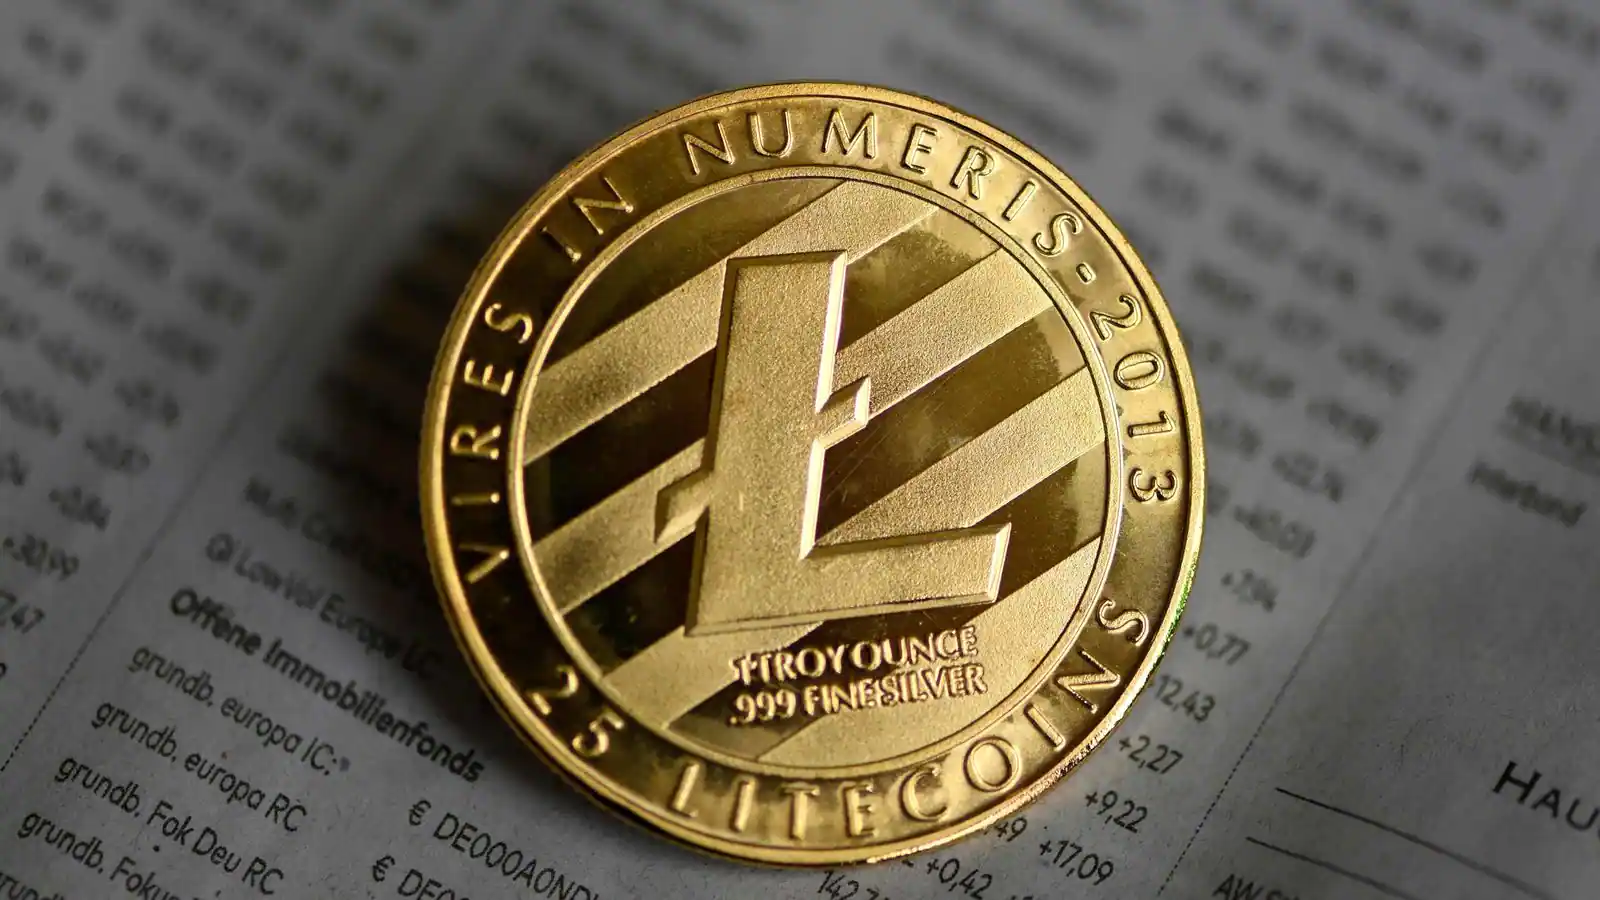 Fundamental Analysis of Litecoin& Its Future Expected Course